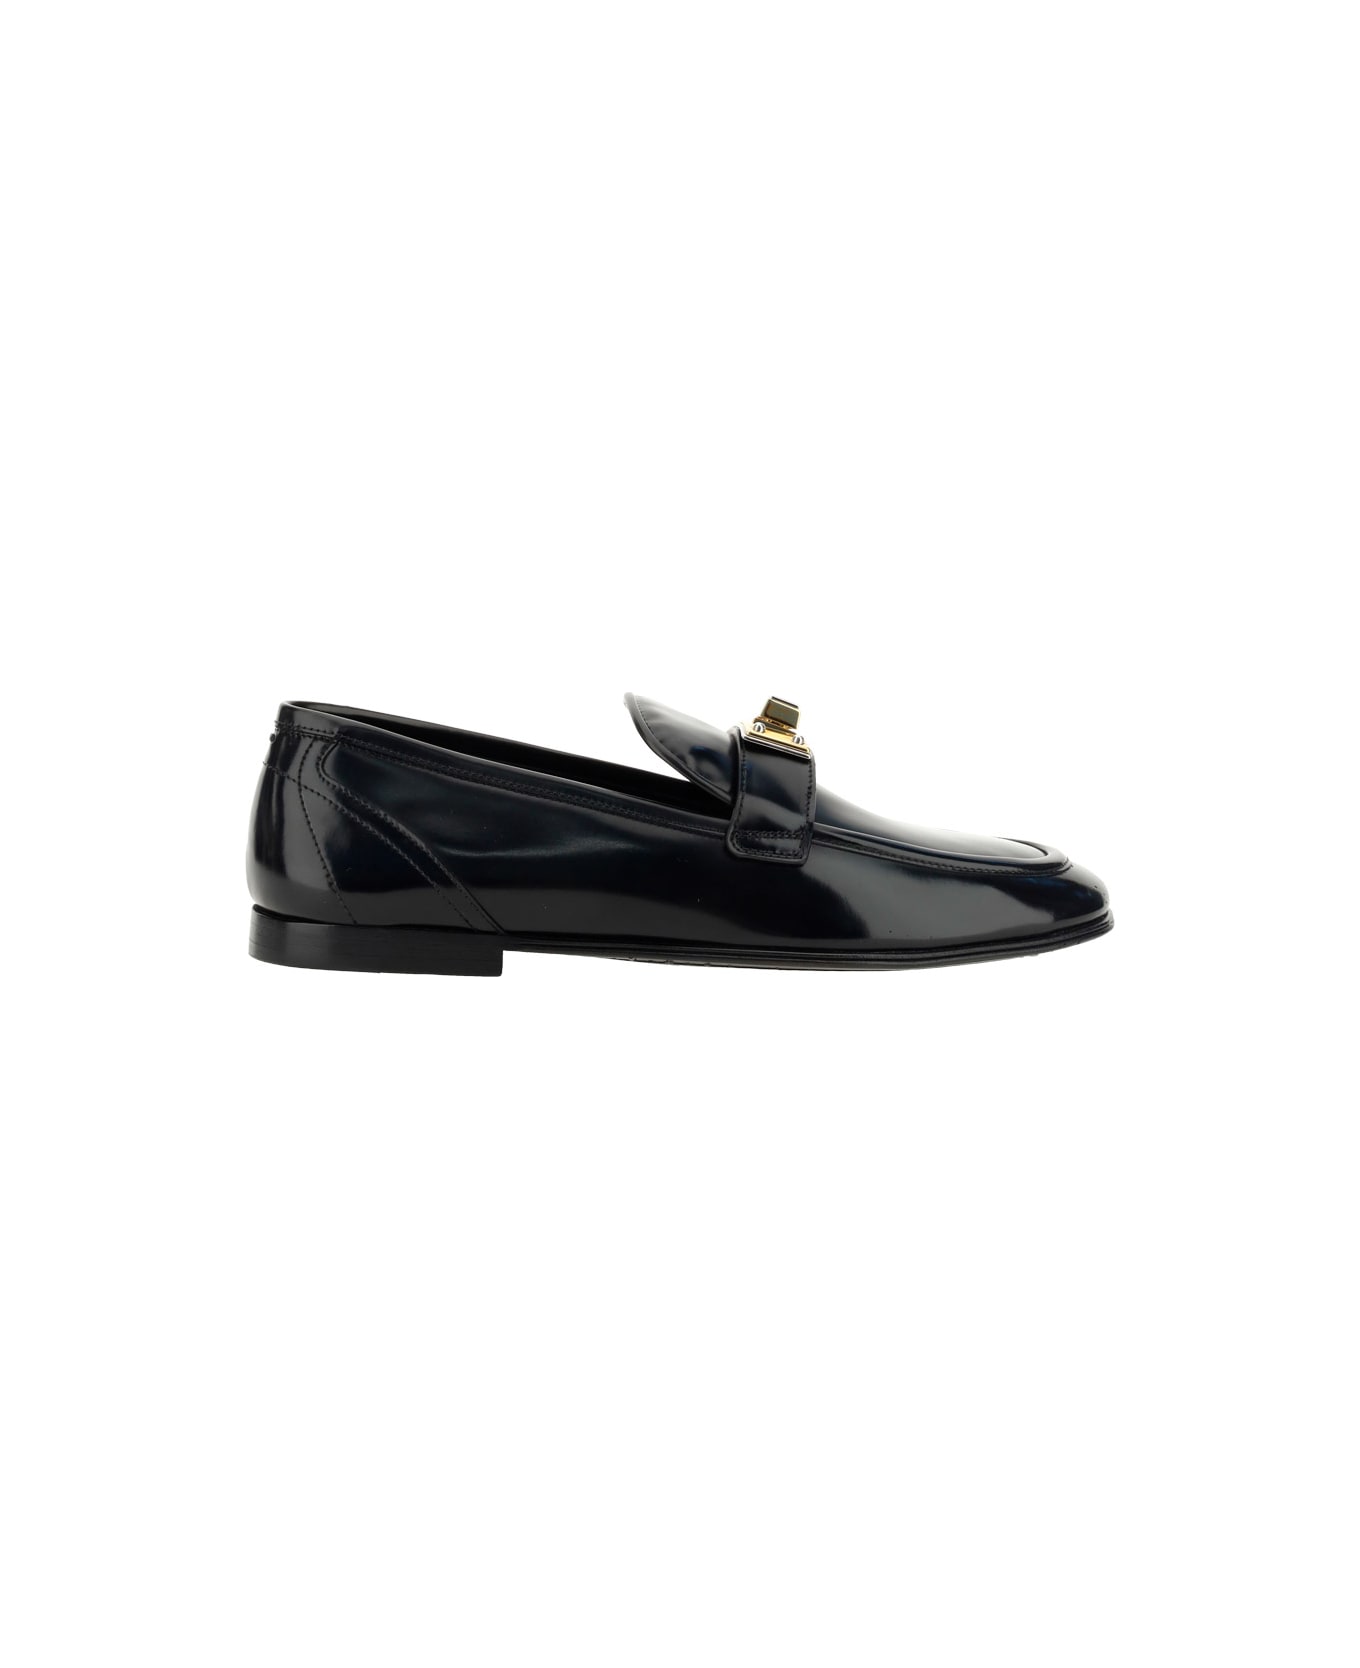 Dolce & Gabbana Leather Loafers - Black